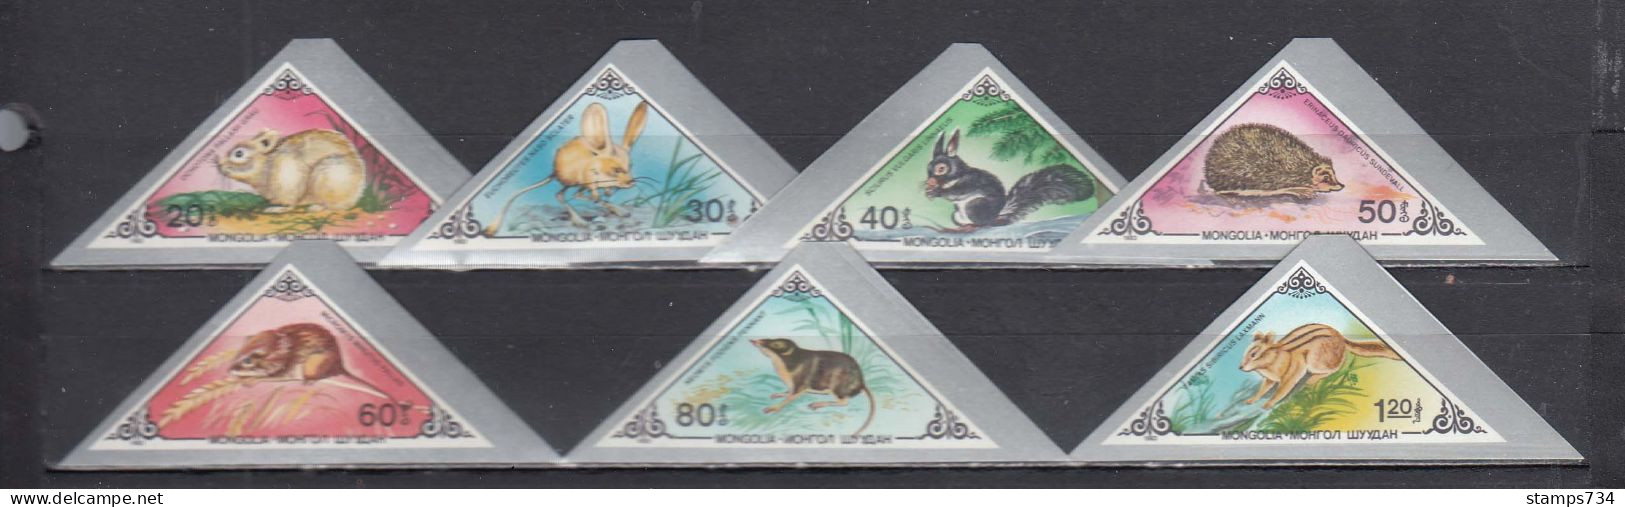 Mongolia 1983 - Animals: Small Mammals, Mi-Nr. 1592/98, Imperforated, MNH** - Mongolie